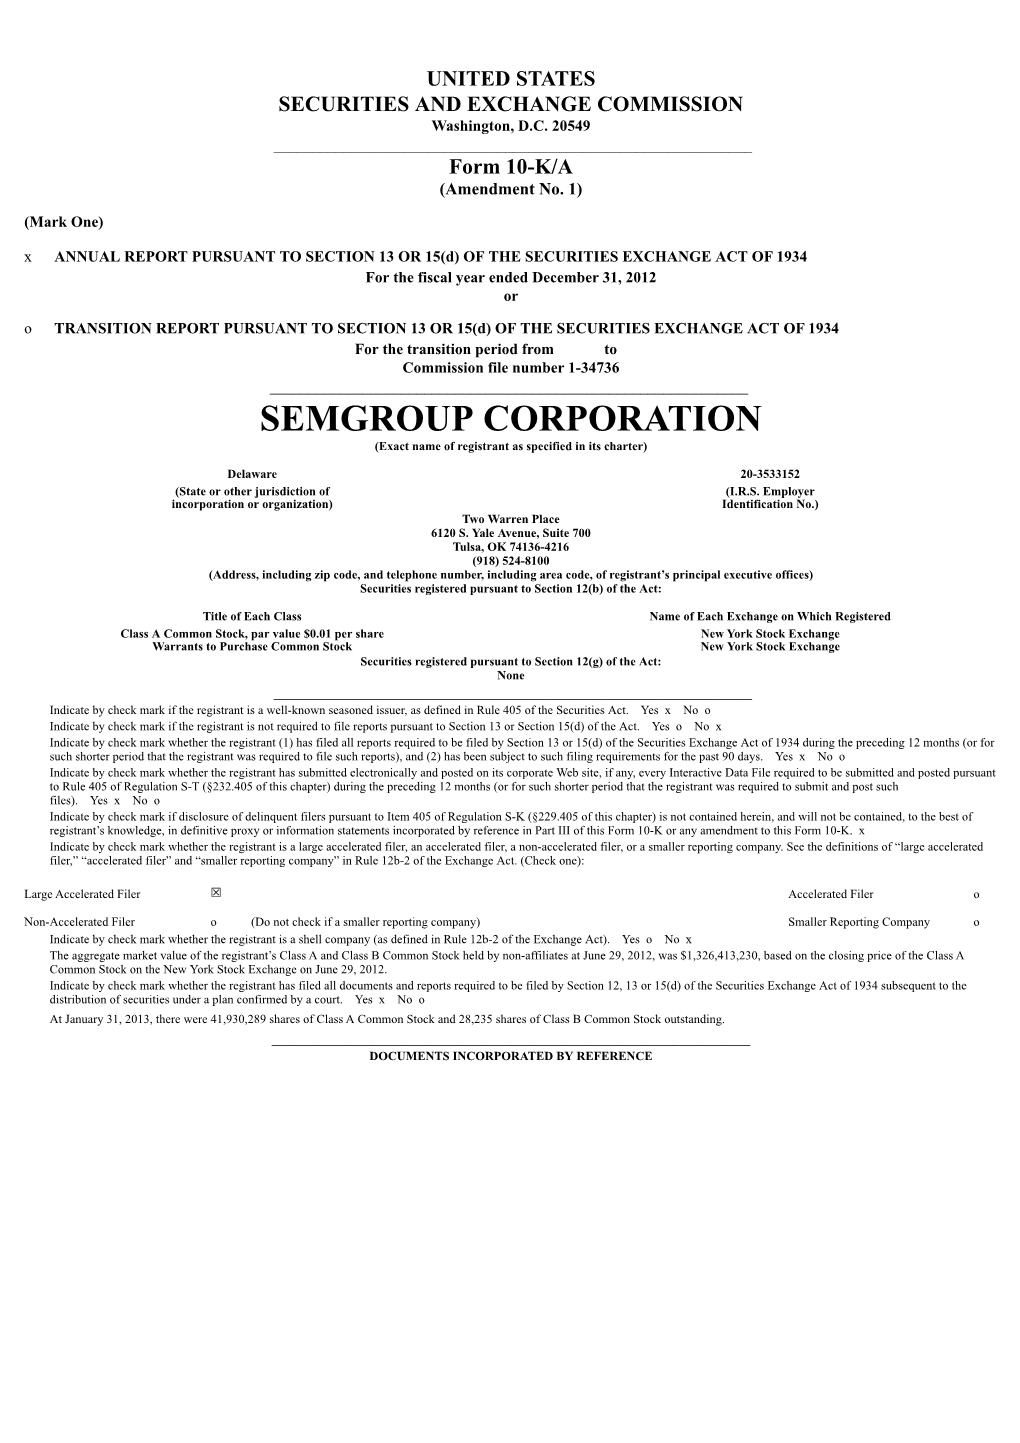 SEMGROUP CORPORATION (Exact Name of Registrant As Specified in Its Charter)